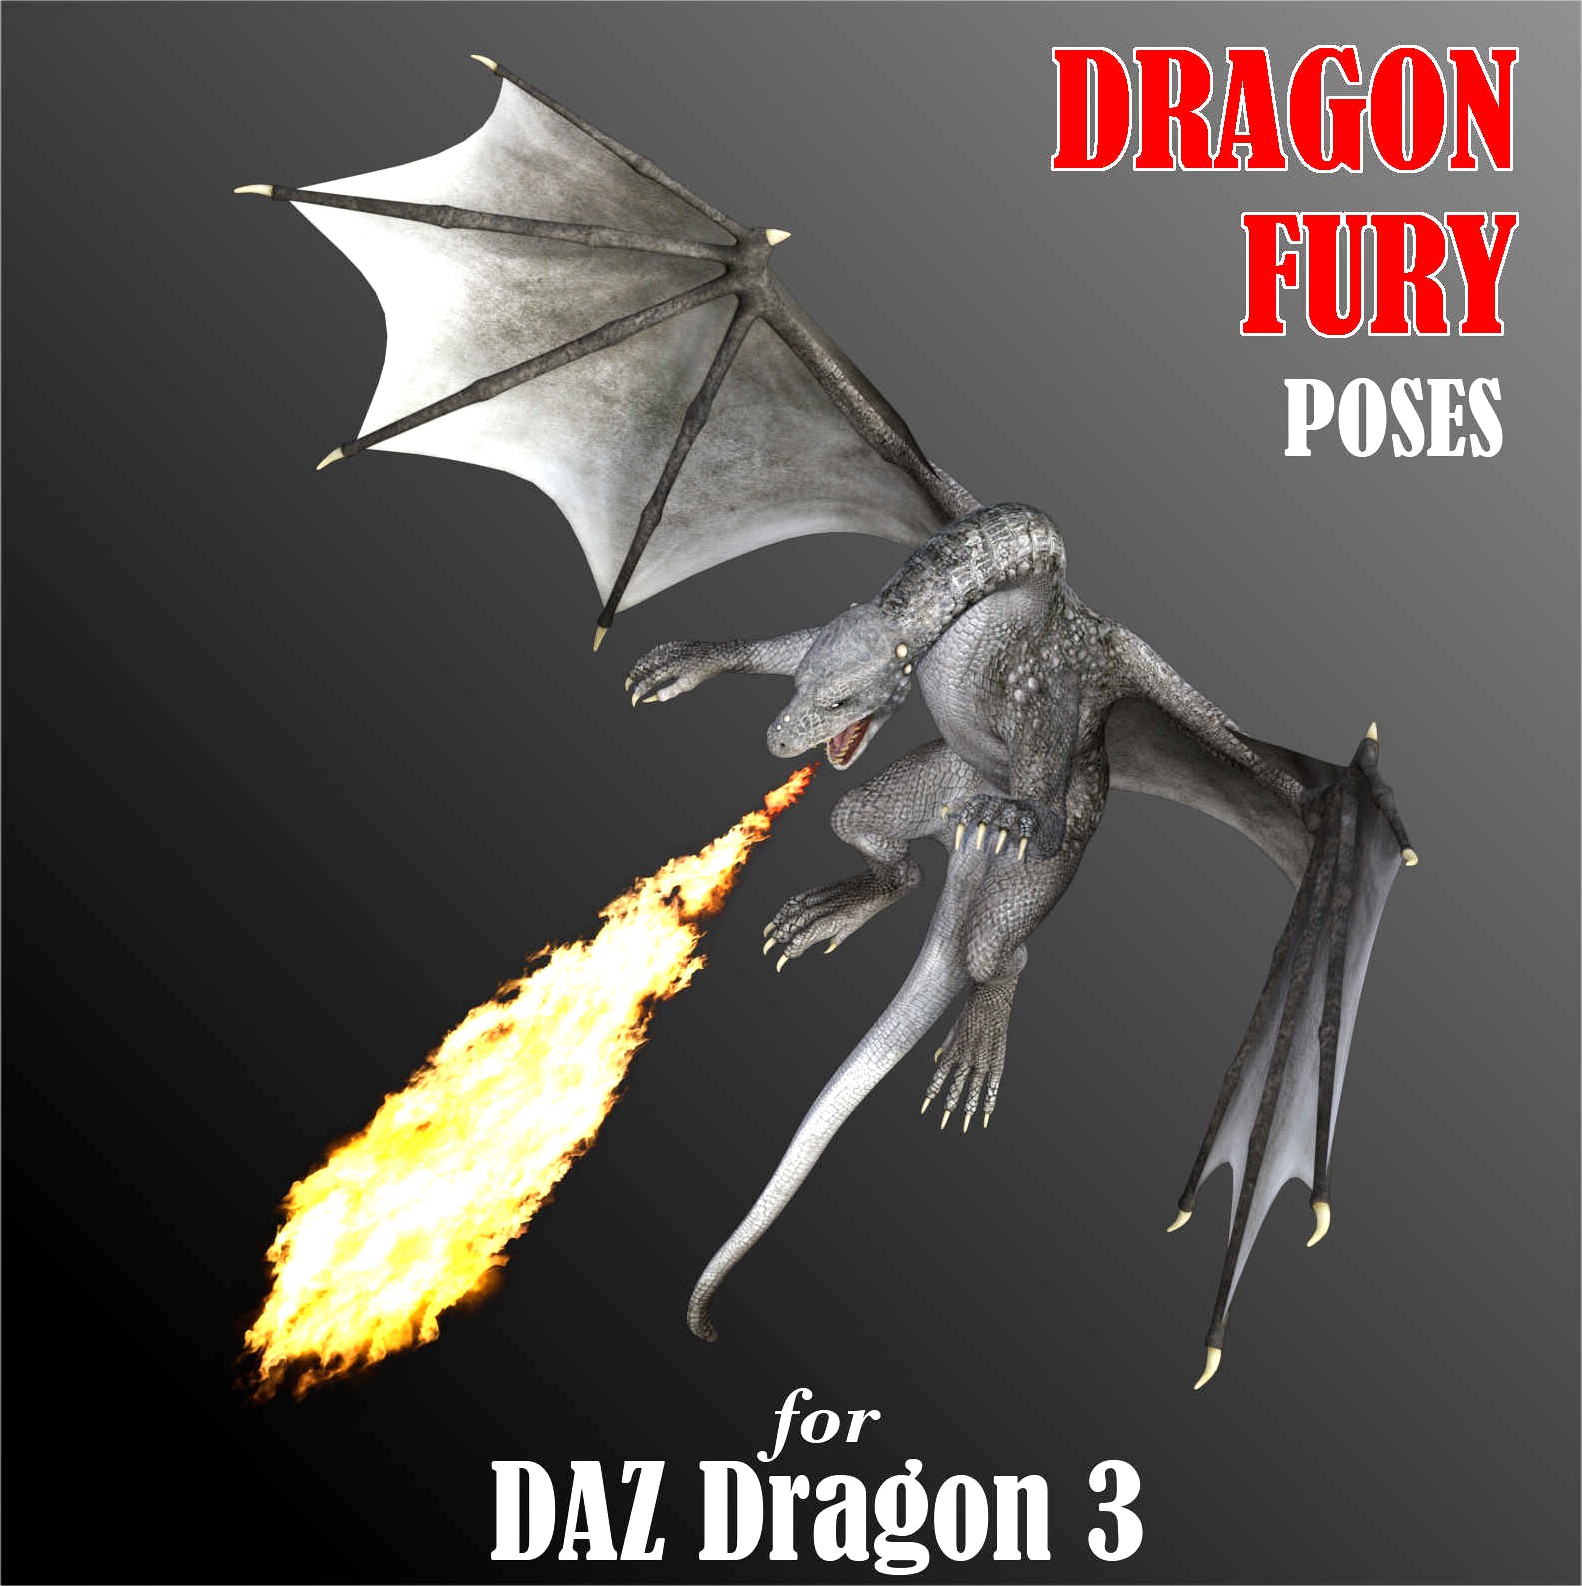 DRAGON FURY Aerial and Ground Combat Poses for Daz Dragon 3 in DS4